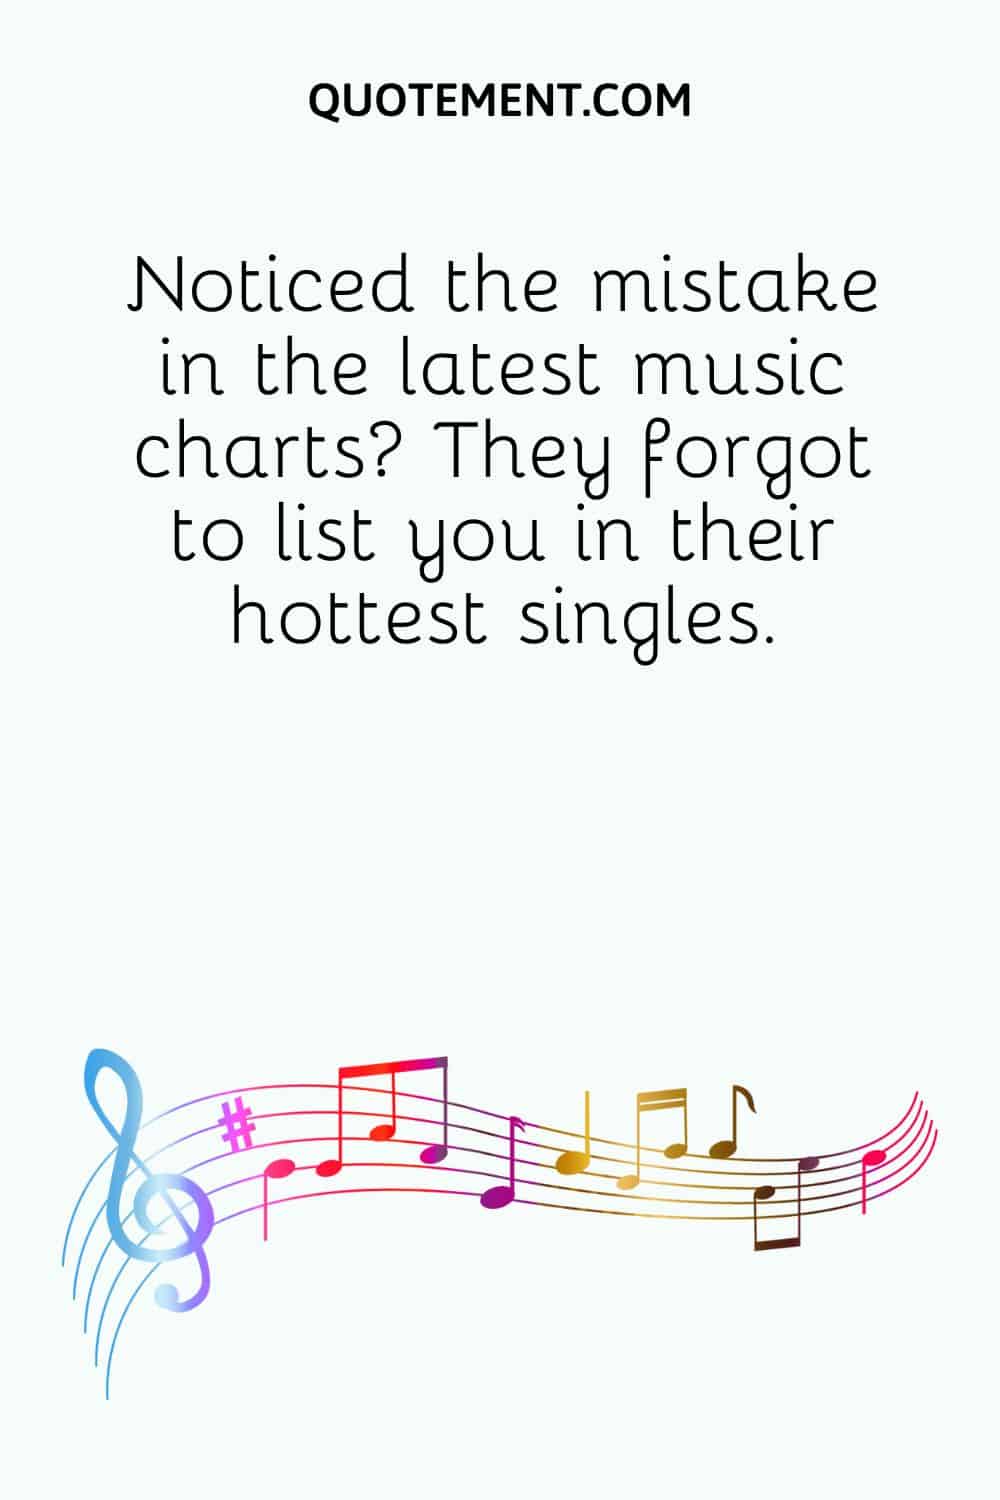 Noticed the mistake in the latest music charts They forgot to list you in their hottest singles